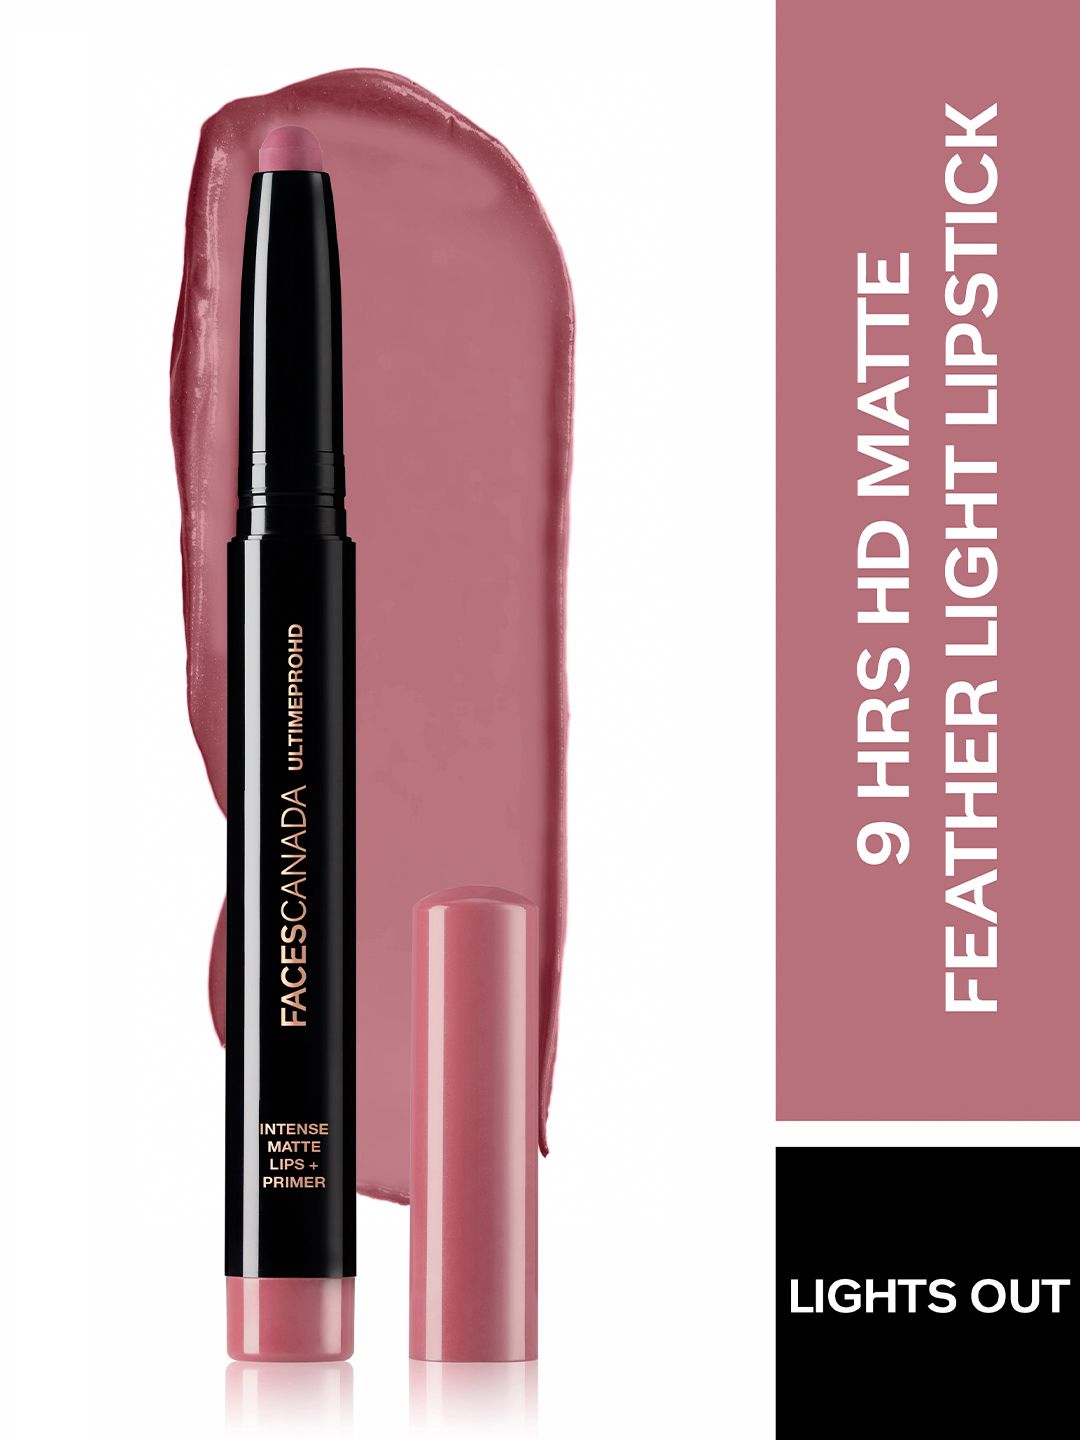 Faces Canada HD Intense Matte Ultra Light-weight Lipstick & Primer - Lights Out Price in India